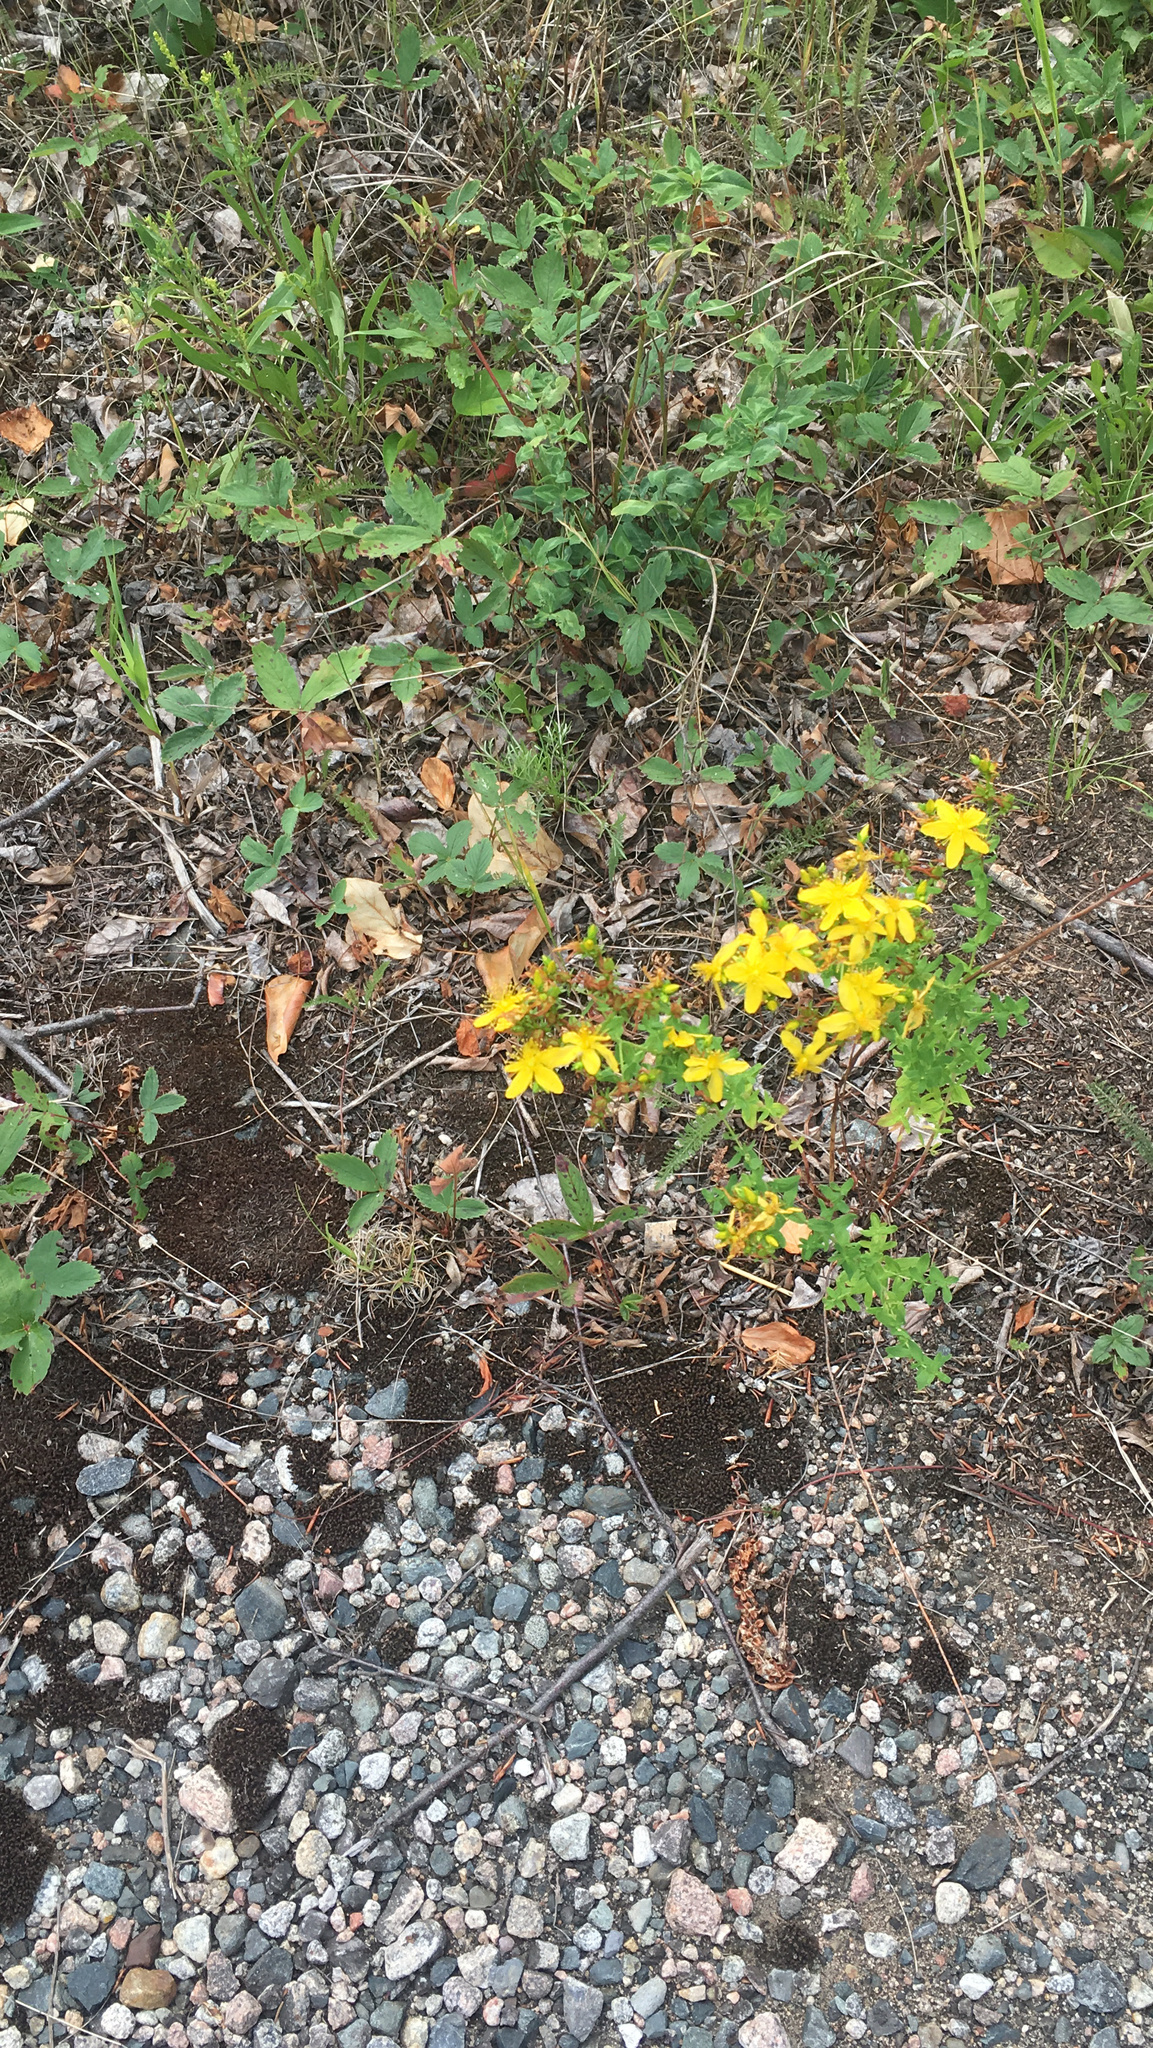 photo of Hypericum perforatum / common St. John's wort in Whiteshell Prov Park Manitoba MB. Photo by BLinklater via iNaturalist CC BY-NC